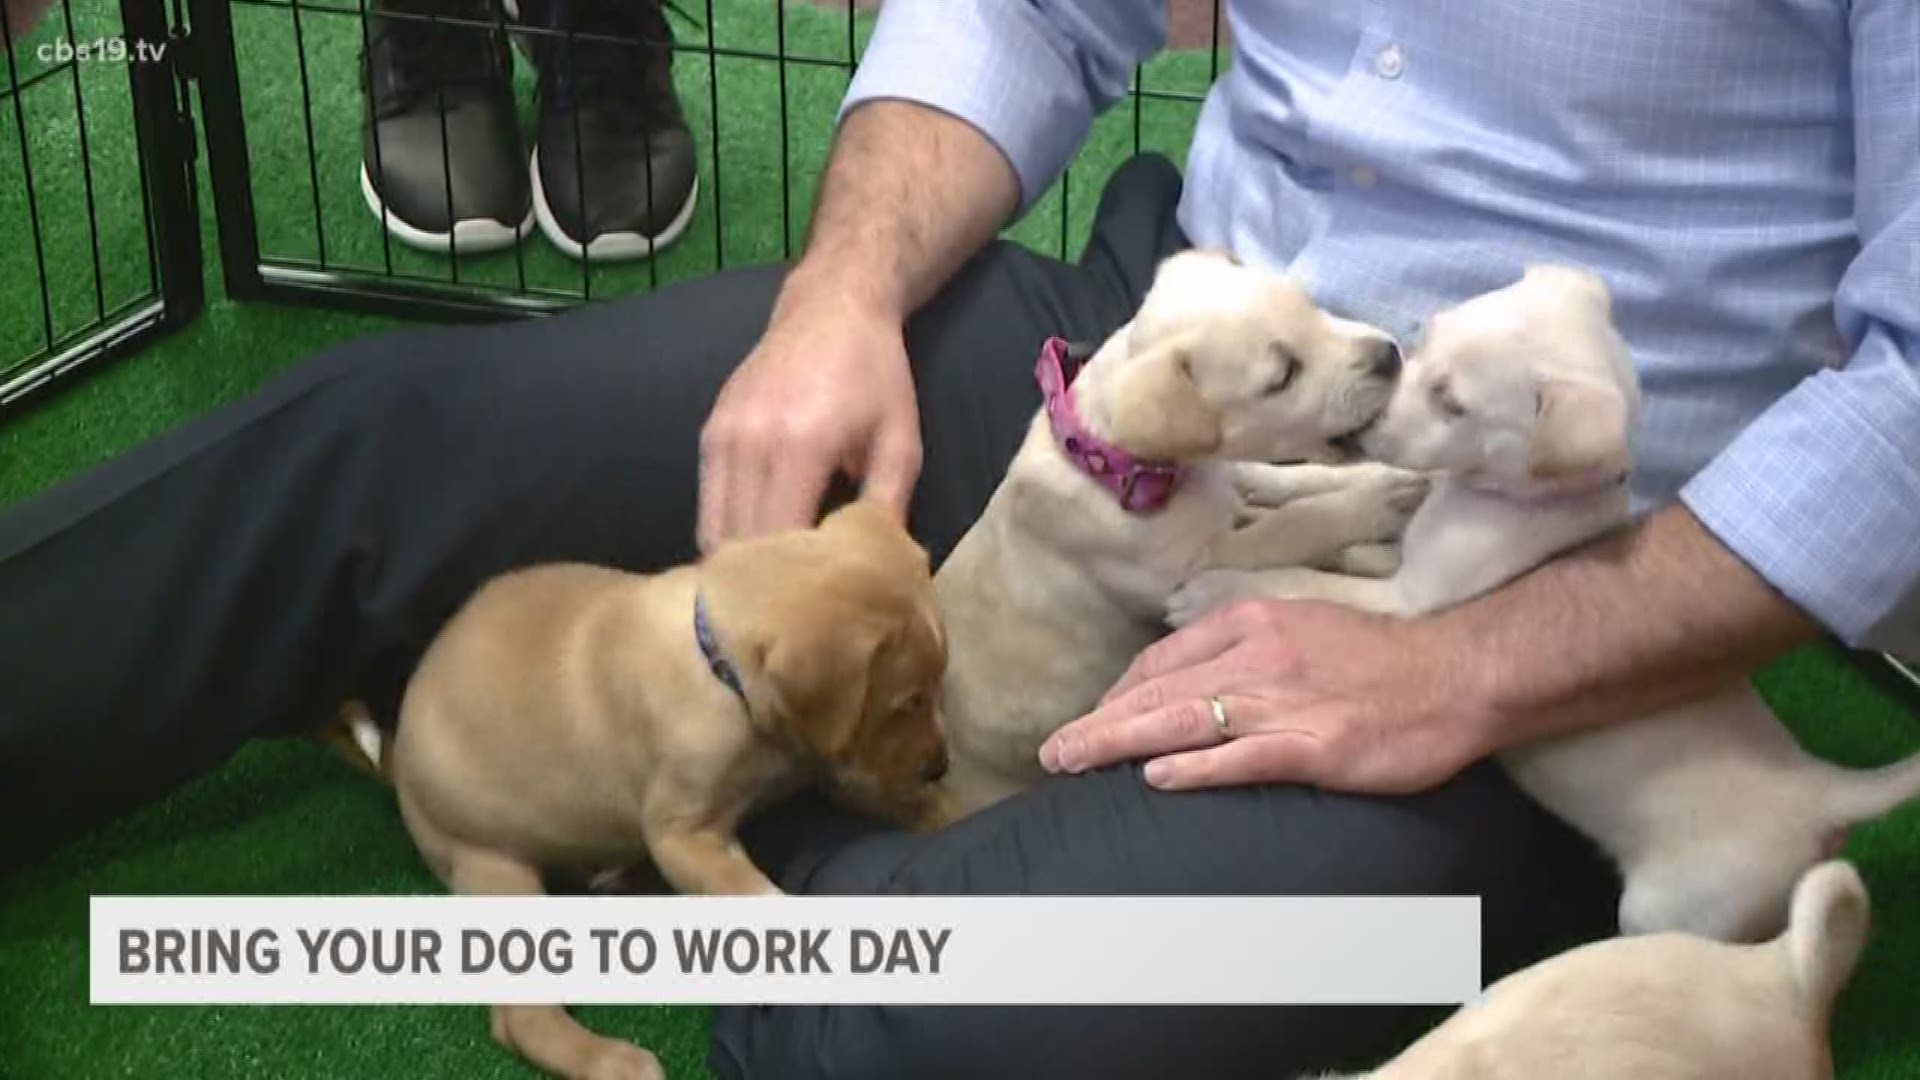 Today is National Bring Your Dog to Work Day!